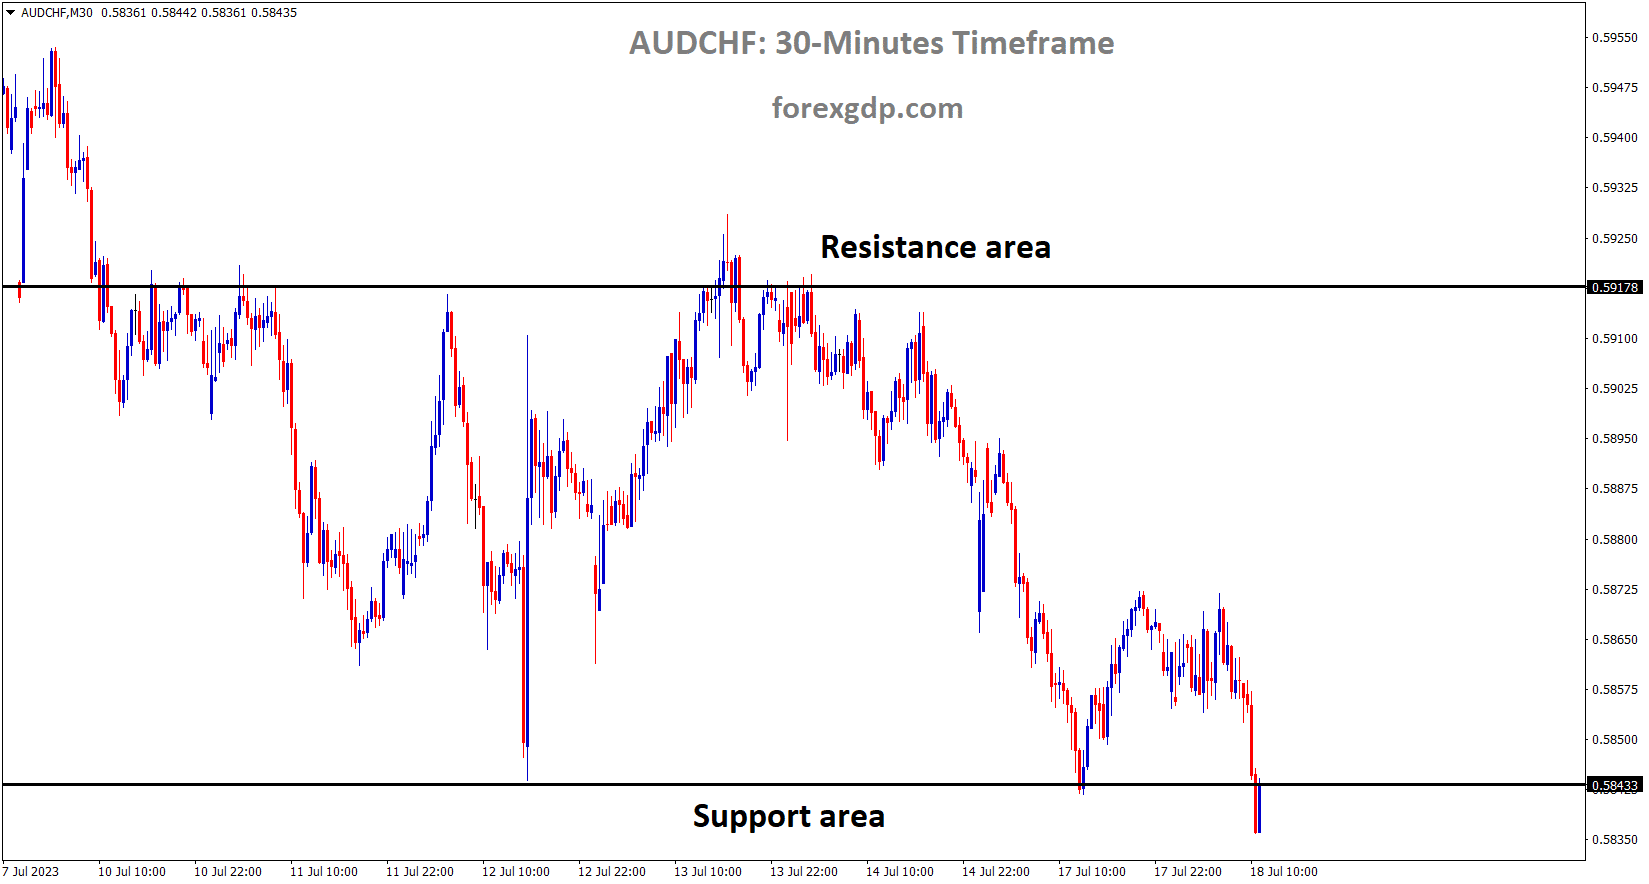 AUDCHF is moving in the Box pattern and the market has reached the horizontal support area of the pattern 1